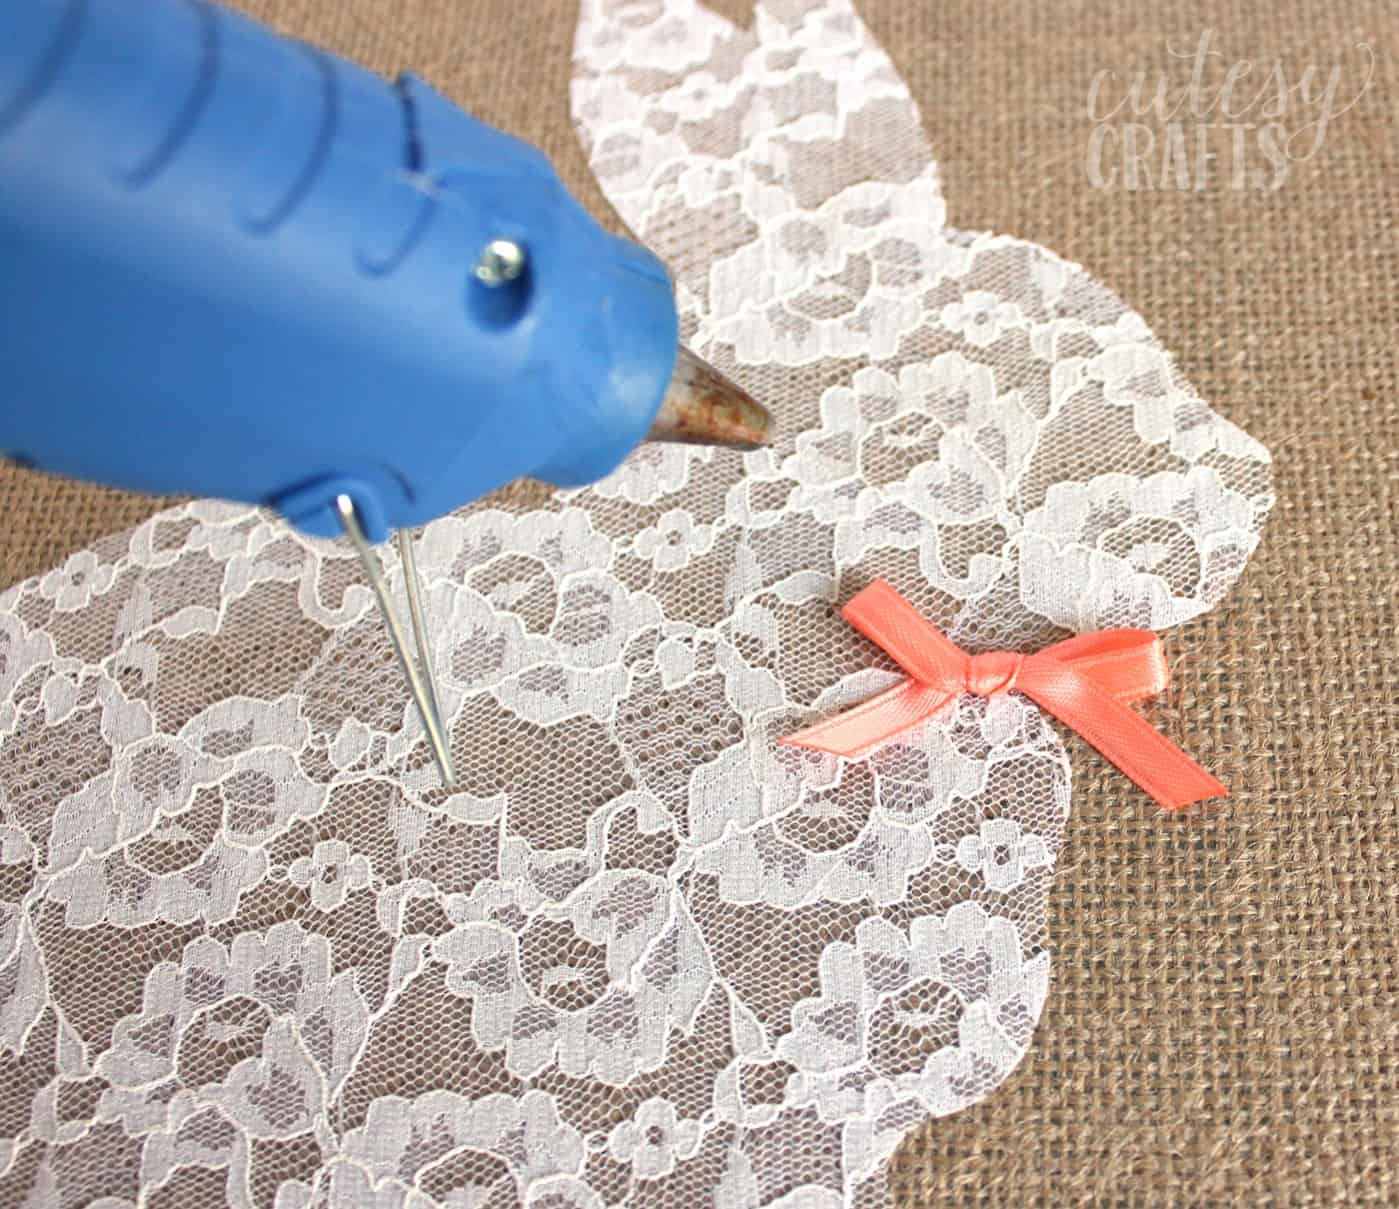 Hot glue gun used to attach the ribbon to the rabbit canvas